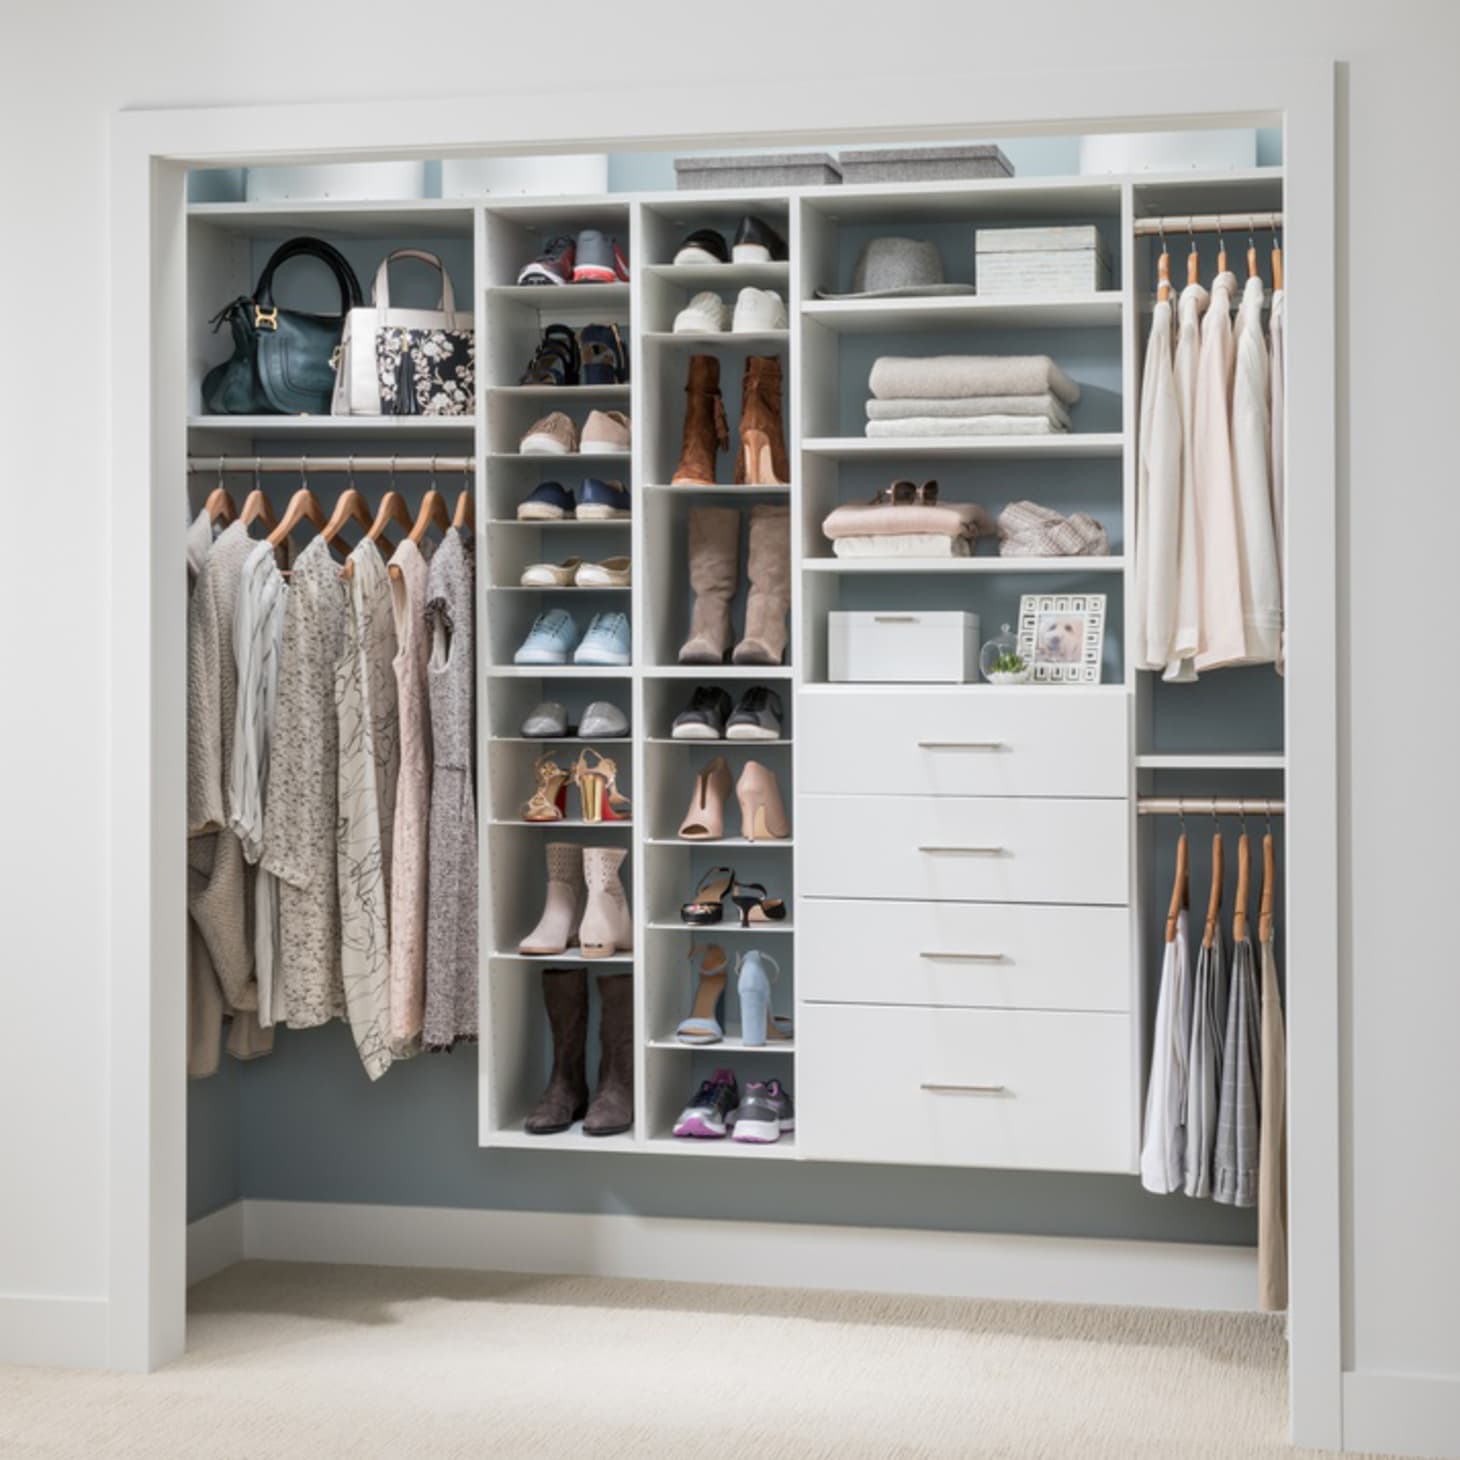 The Best Closet Systems To Organize Your Wardrobe | Apartment Therapy